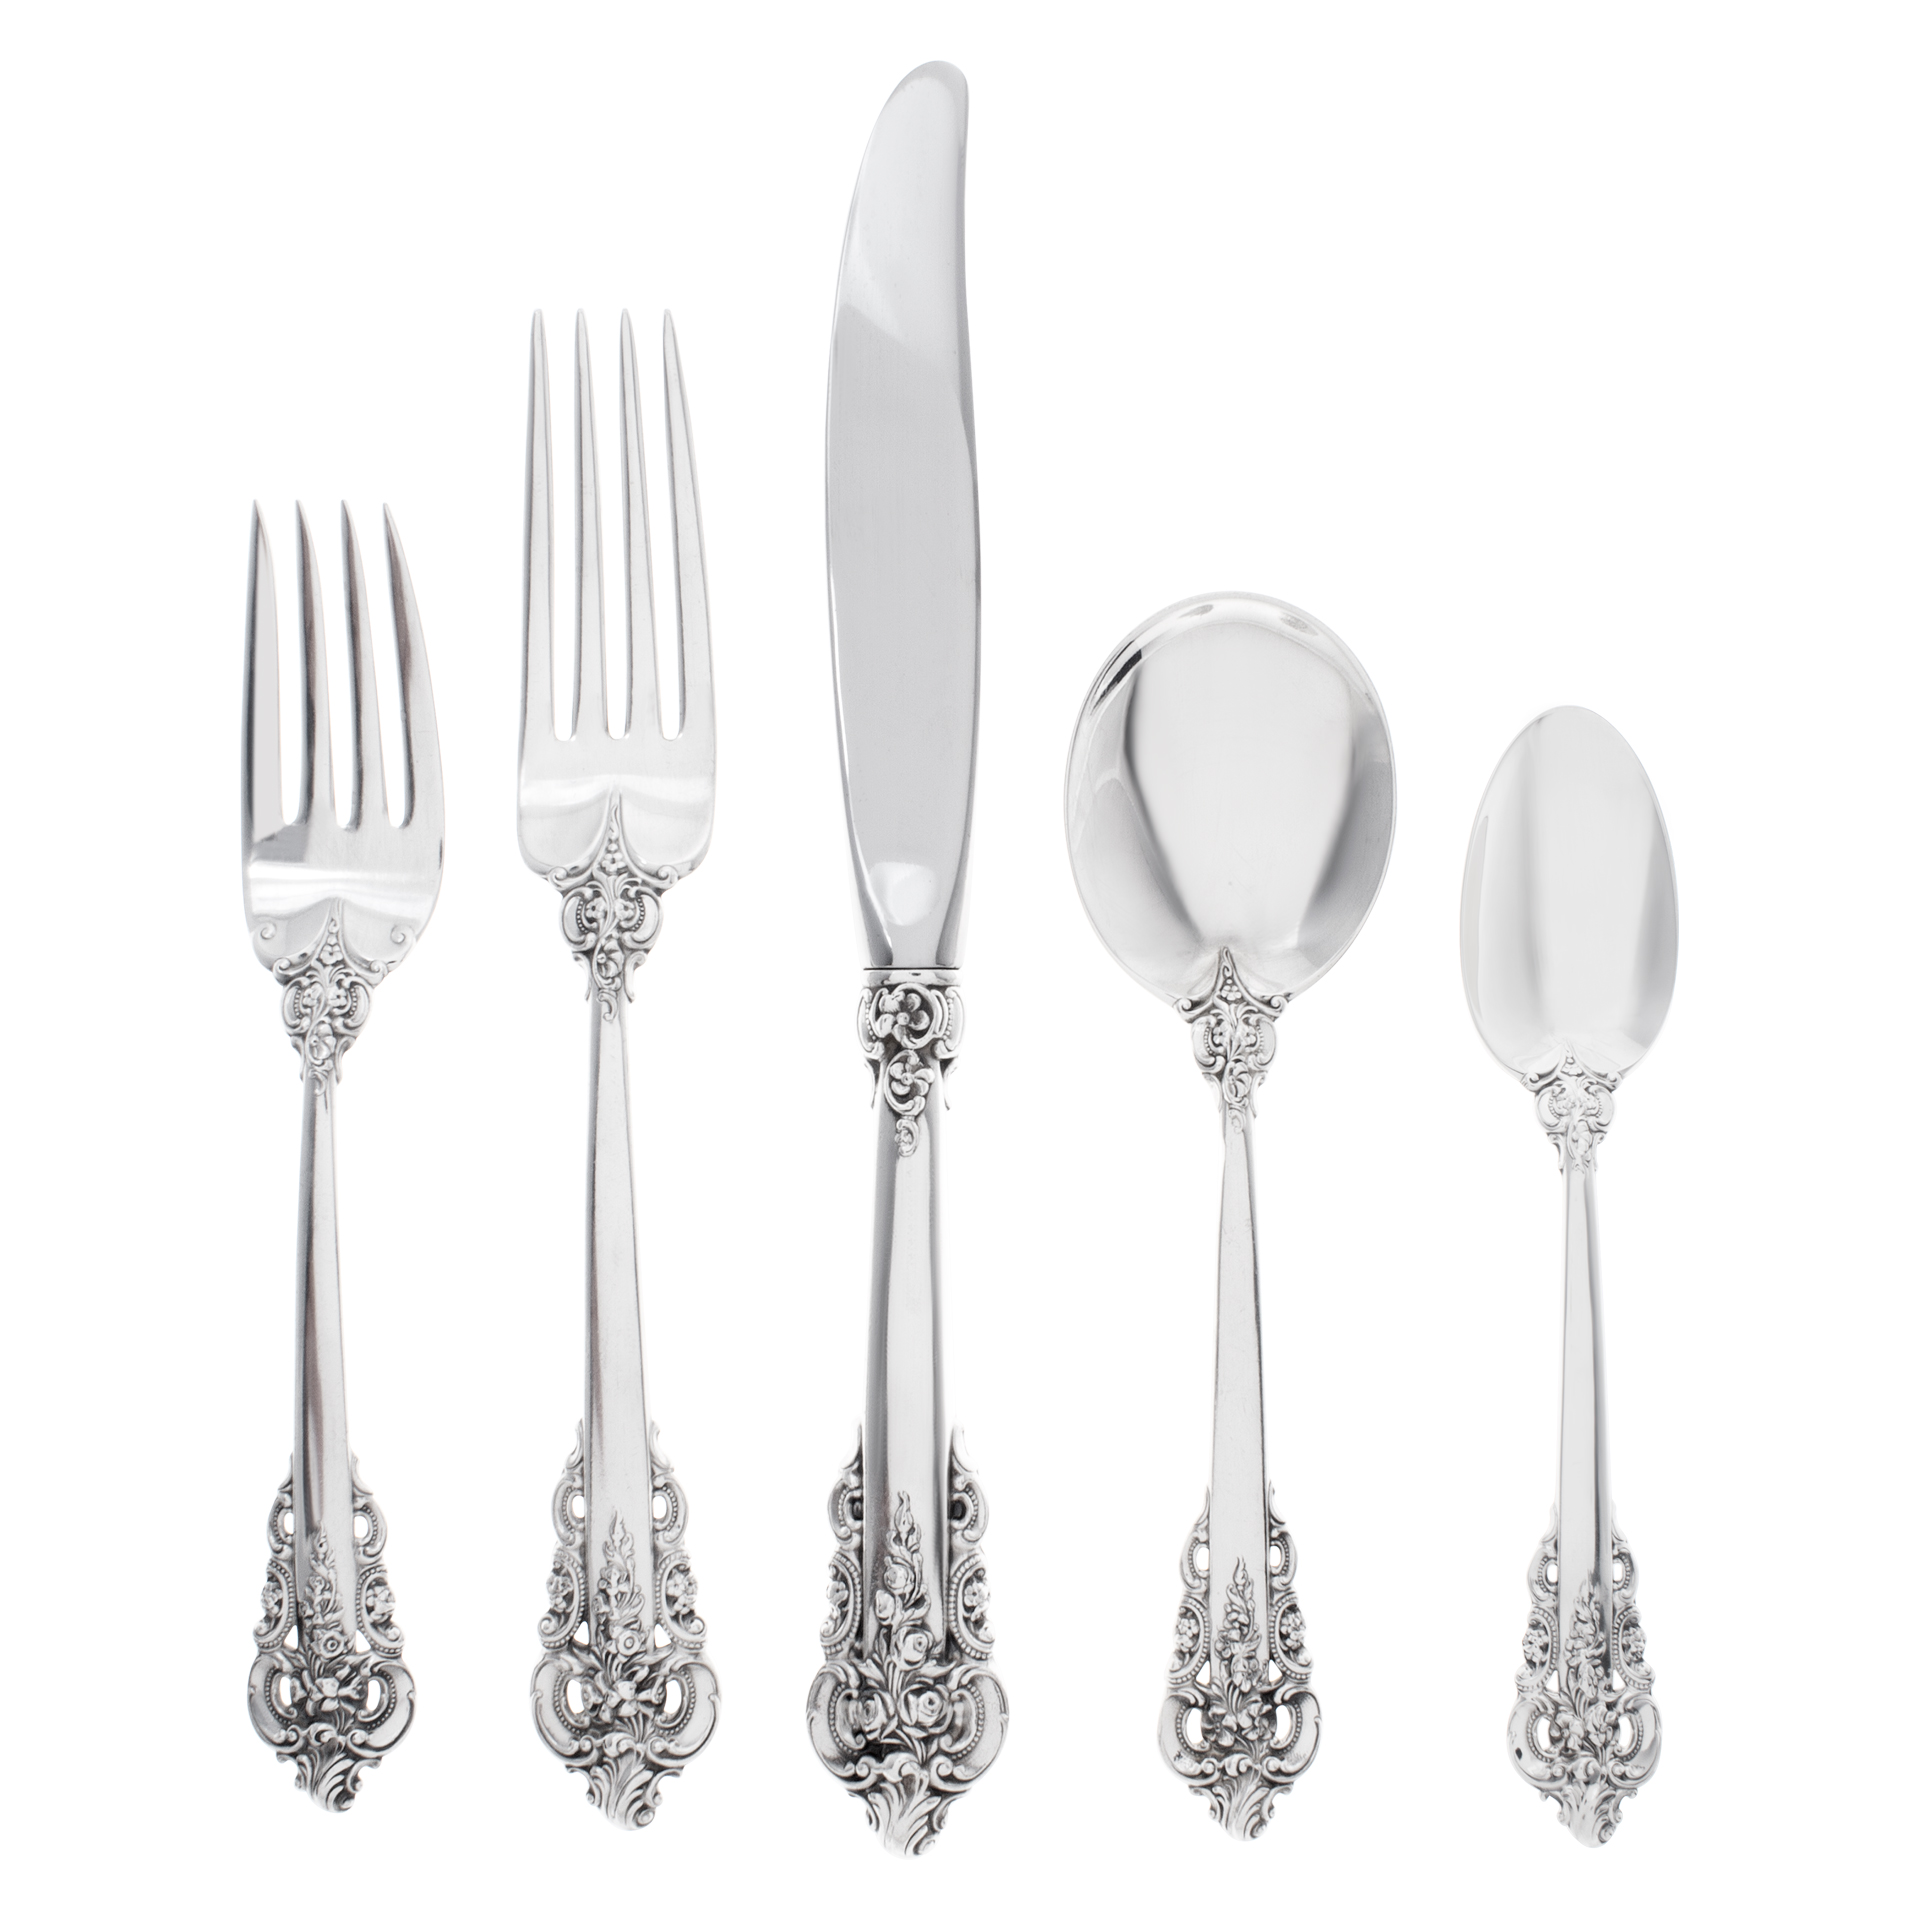 "GRANDE BAROQUE" sterling silver flatware patented in 1941 by Wallace. 5 Place set for 8 with 6 serving pieces- image 1